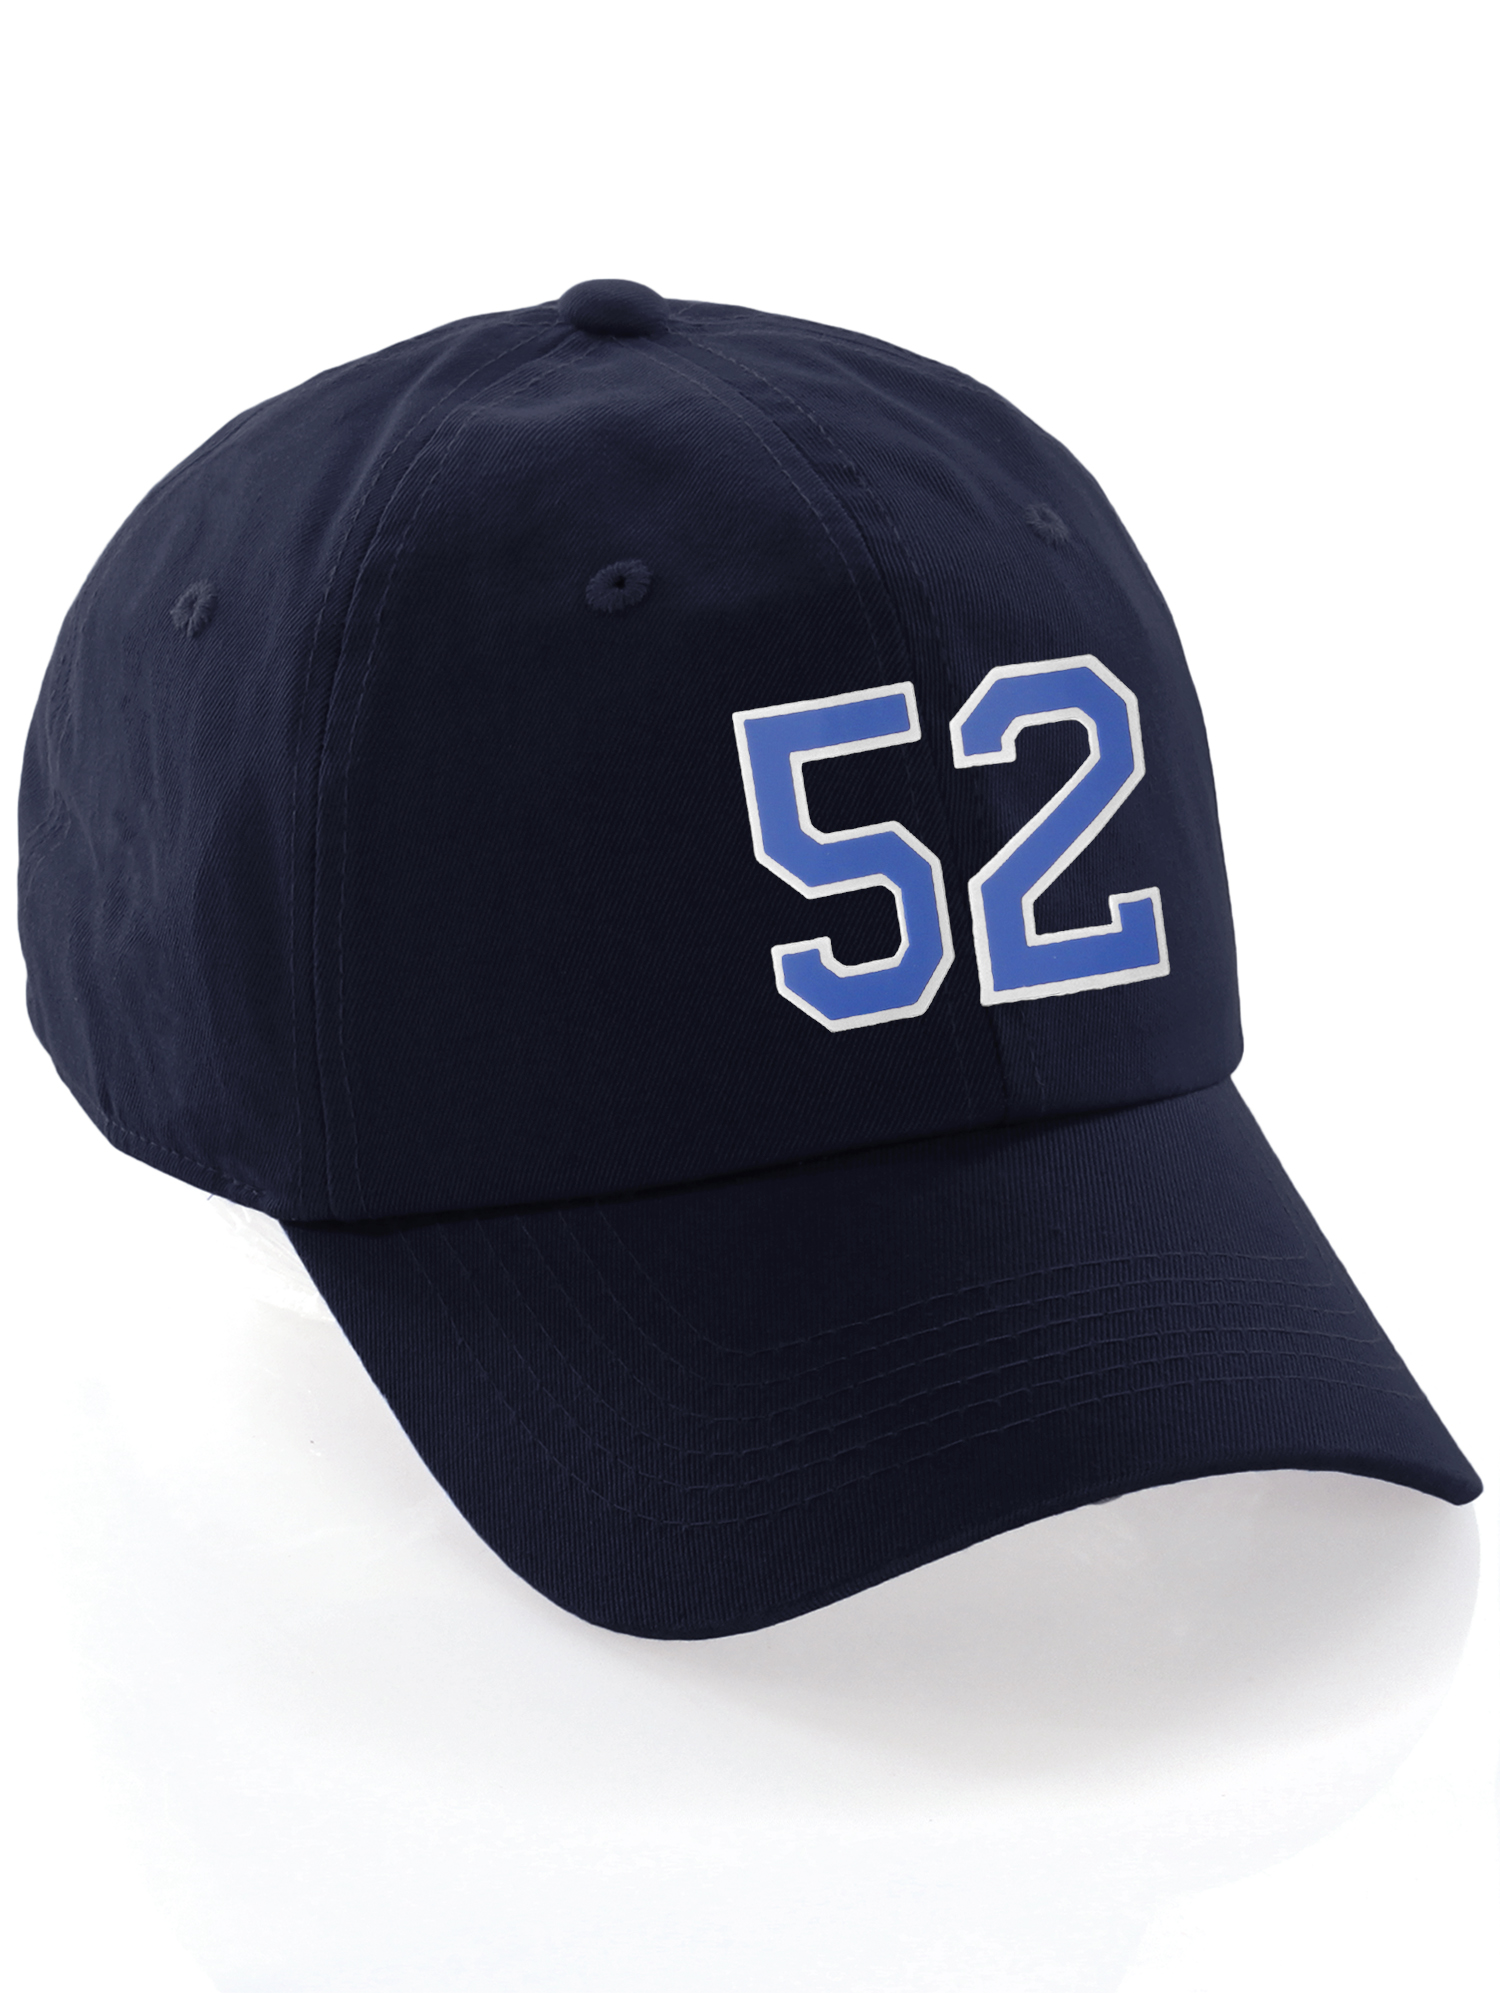 Customized Number Hat 00 to 99 Team Colors Baseball Cap, Navy Hat White Blue Number 52 - image 1 of 4